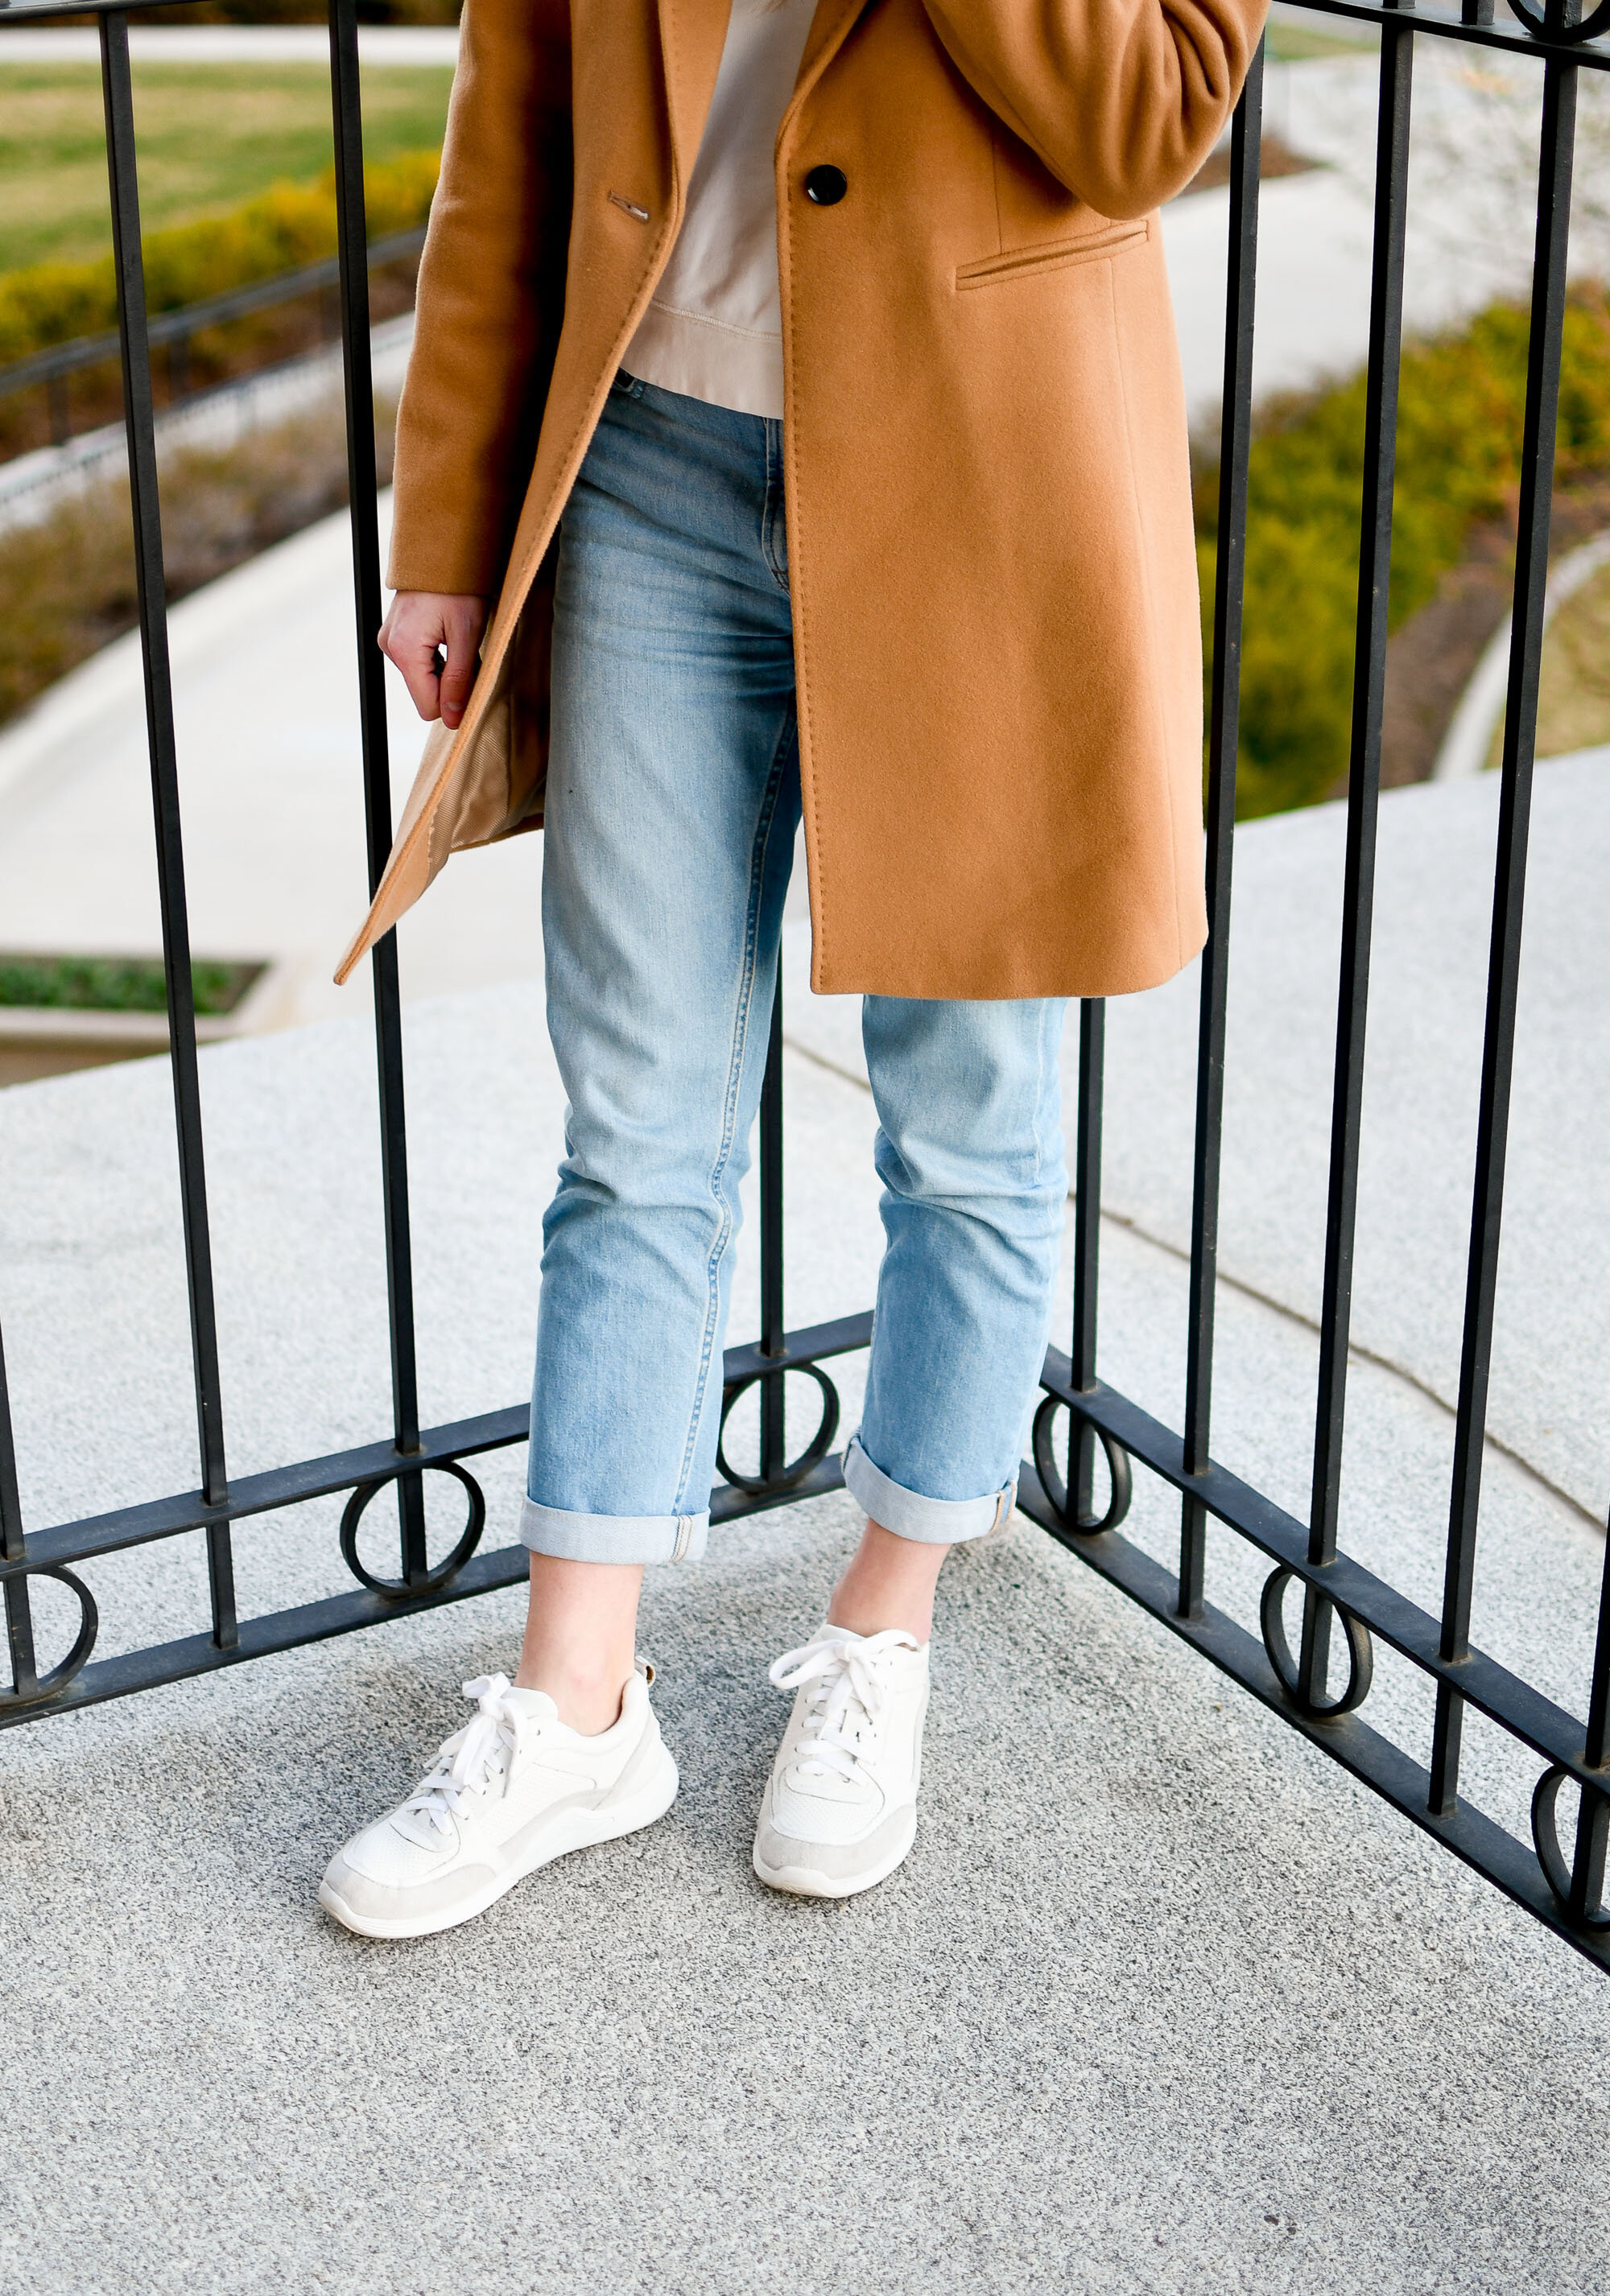 Boyfriend Jeans and Dad Sneakers